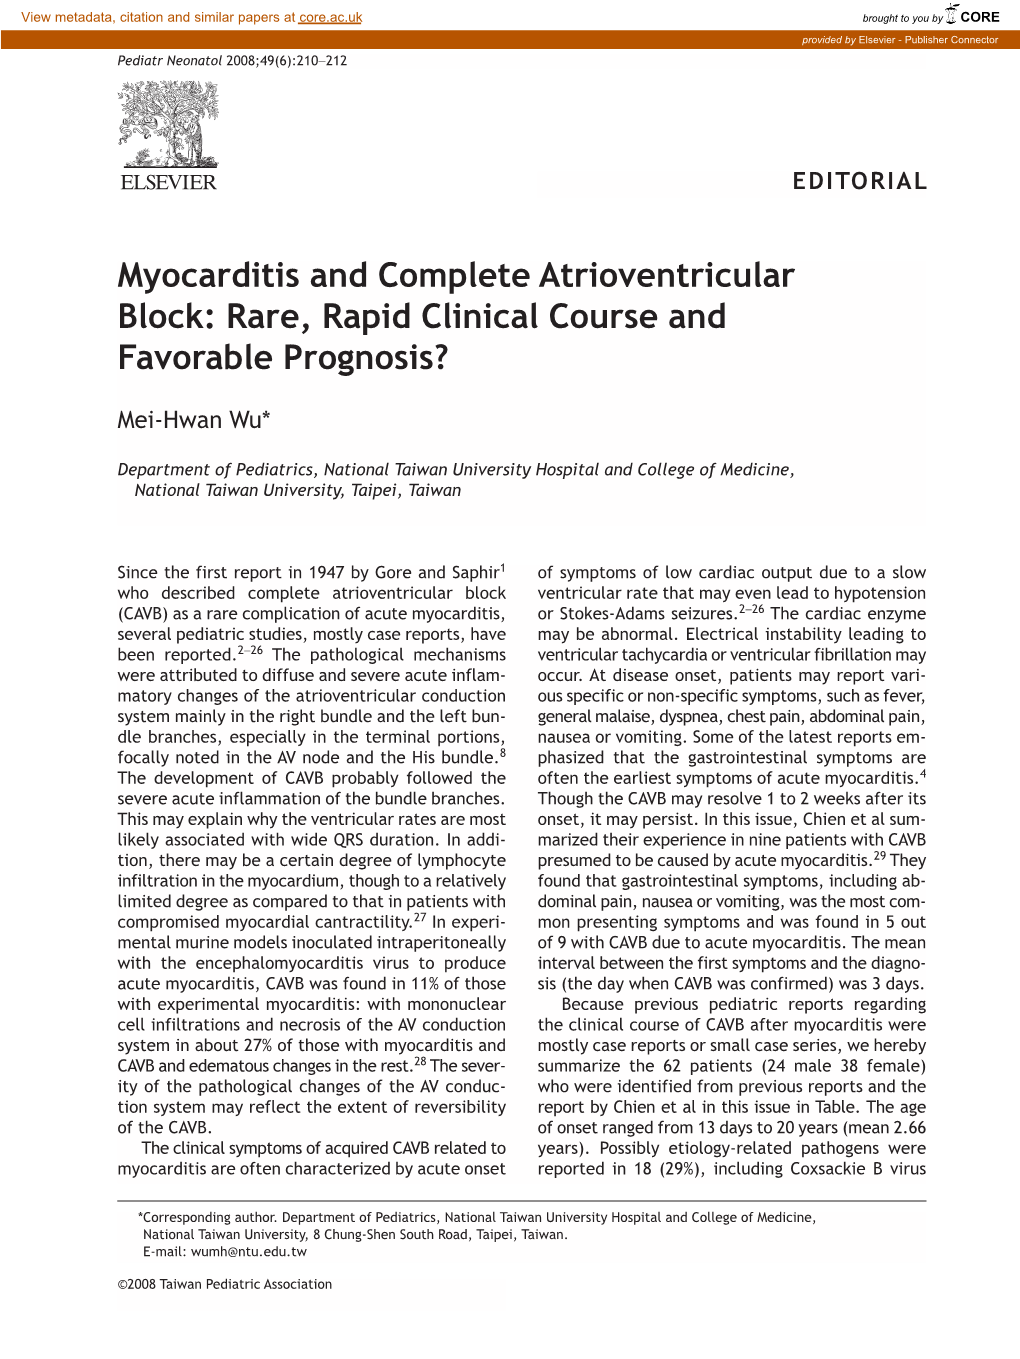 Myocarditis and Complete Atrioventricular Block: Rare, Rapid Clinical Course and Favorable Prognosis?